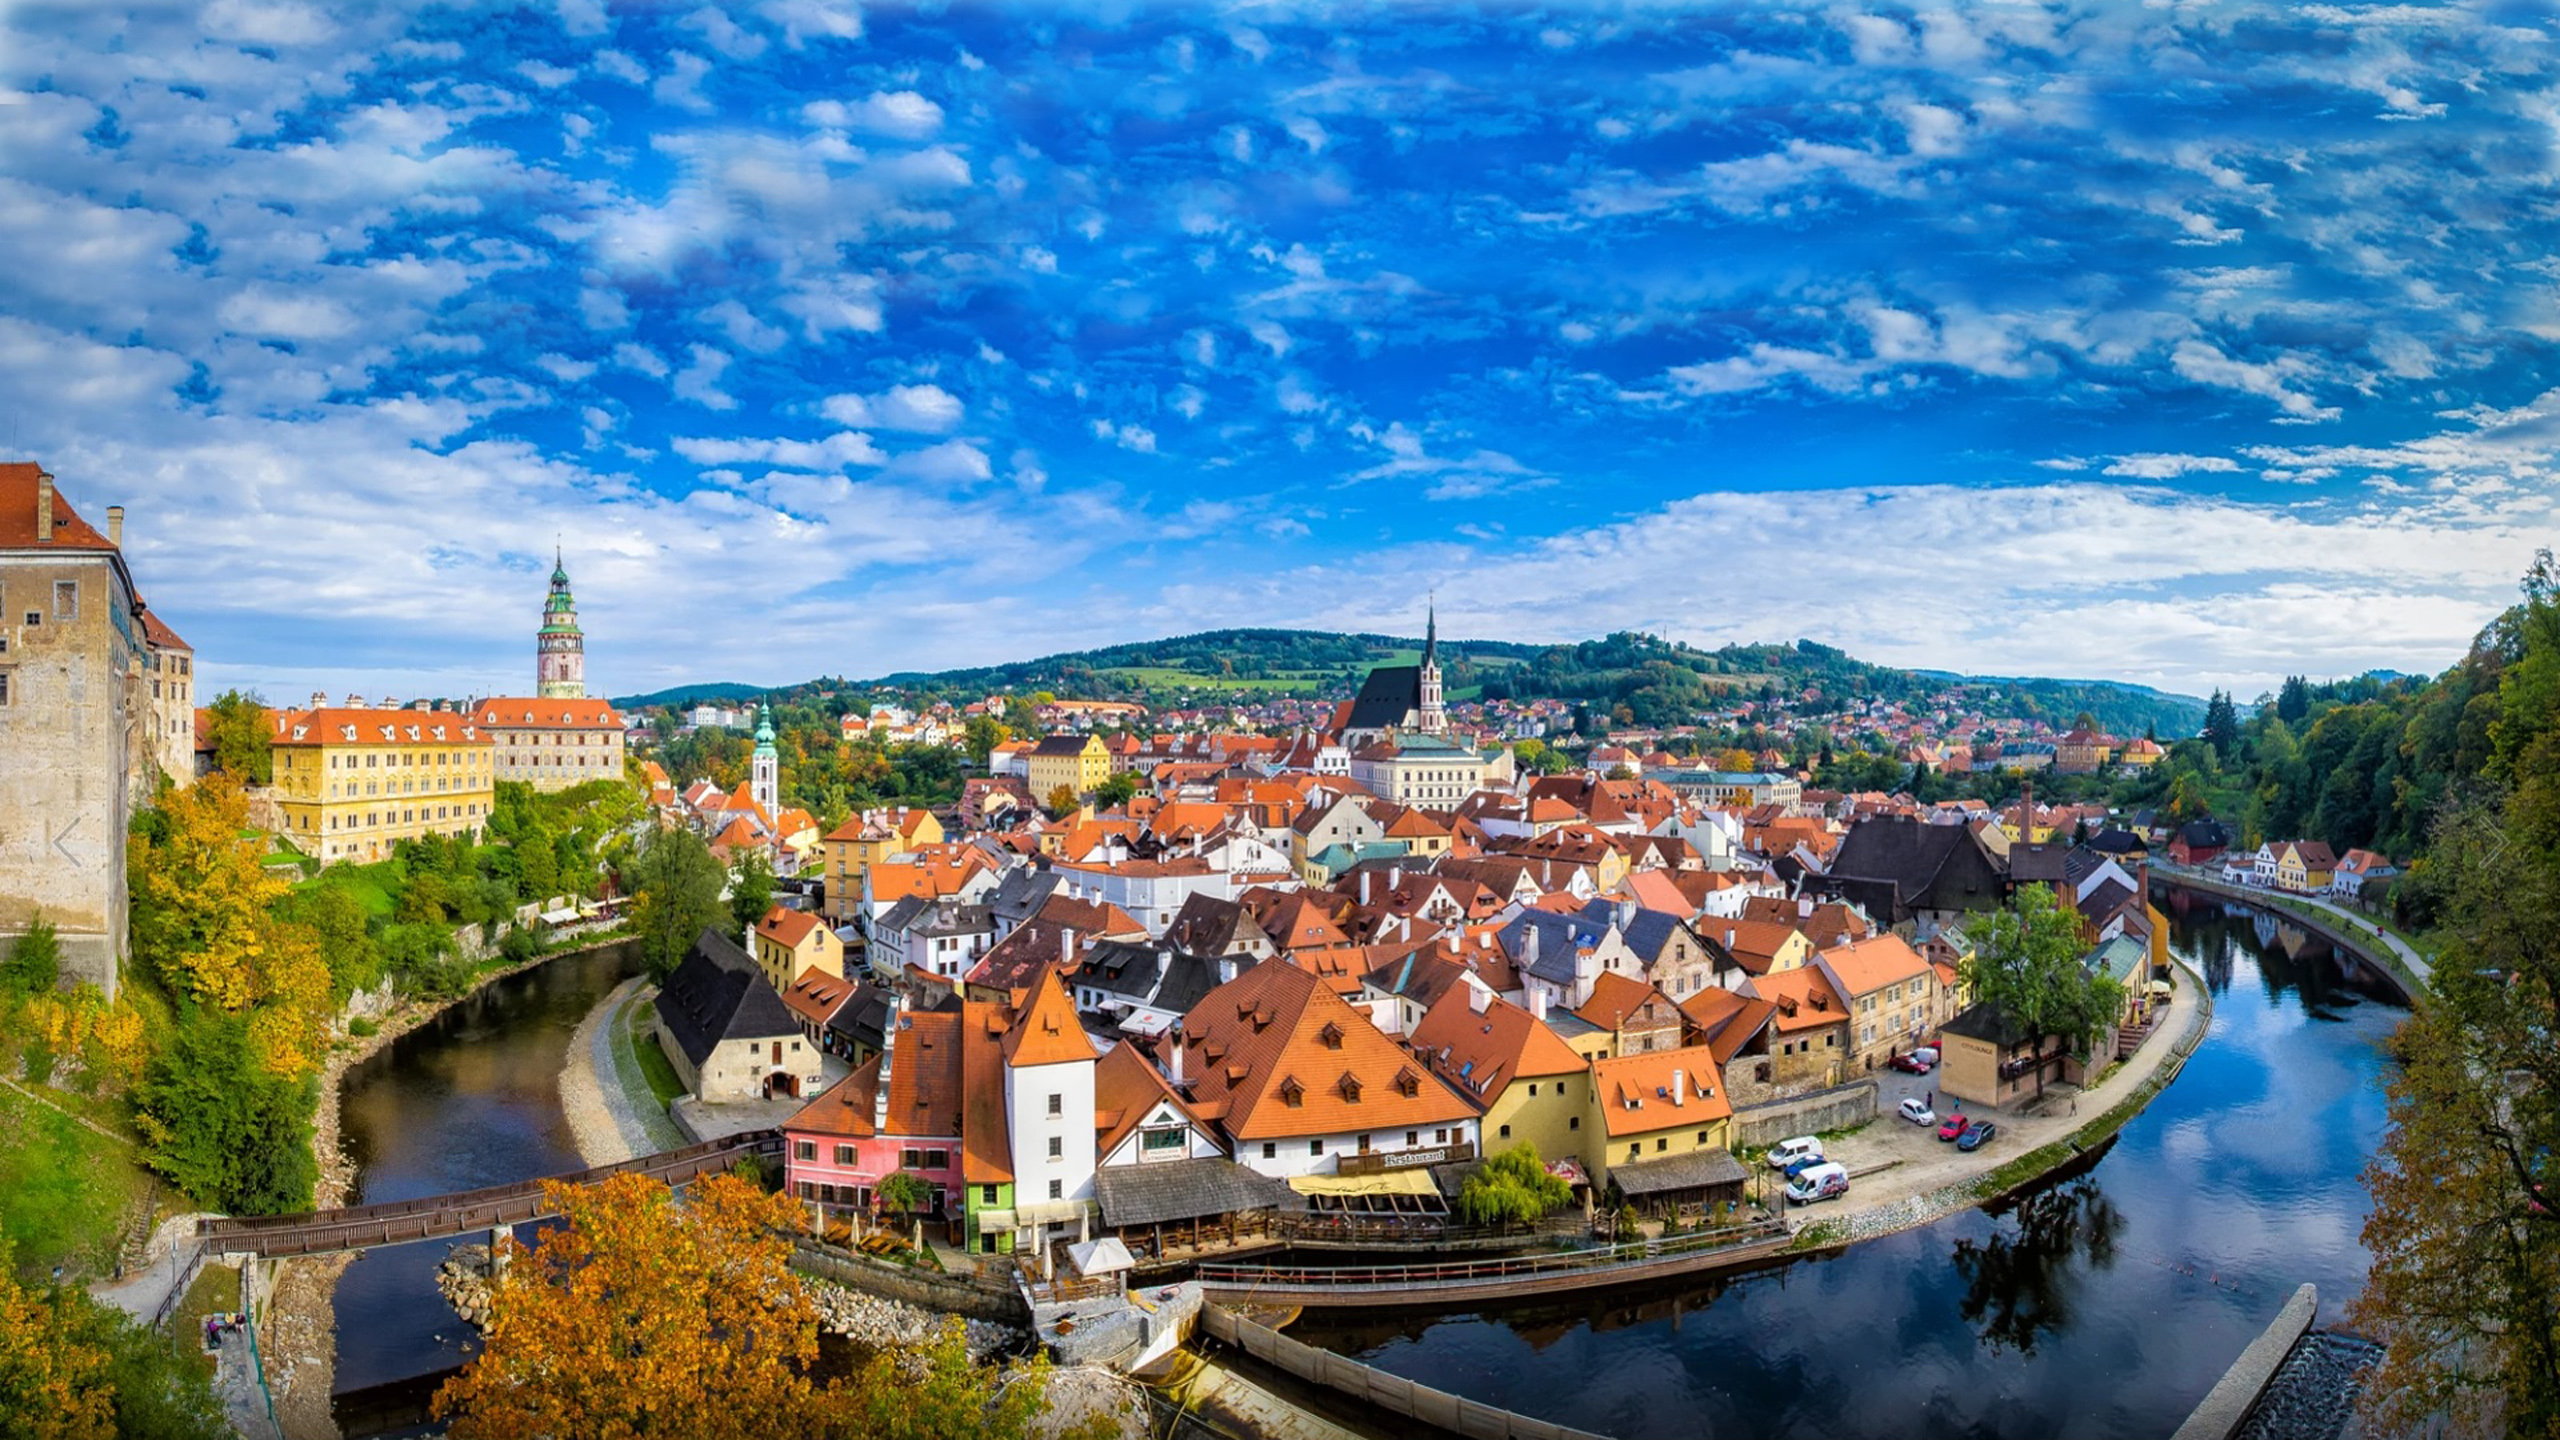 Krumlov City In The Czech Republic Panorama Landscape Hd Wallpapers